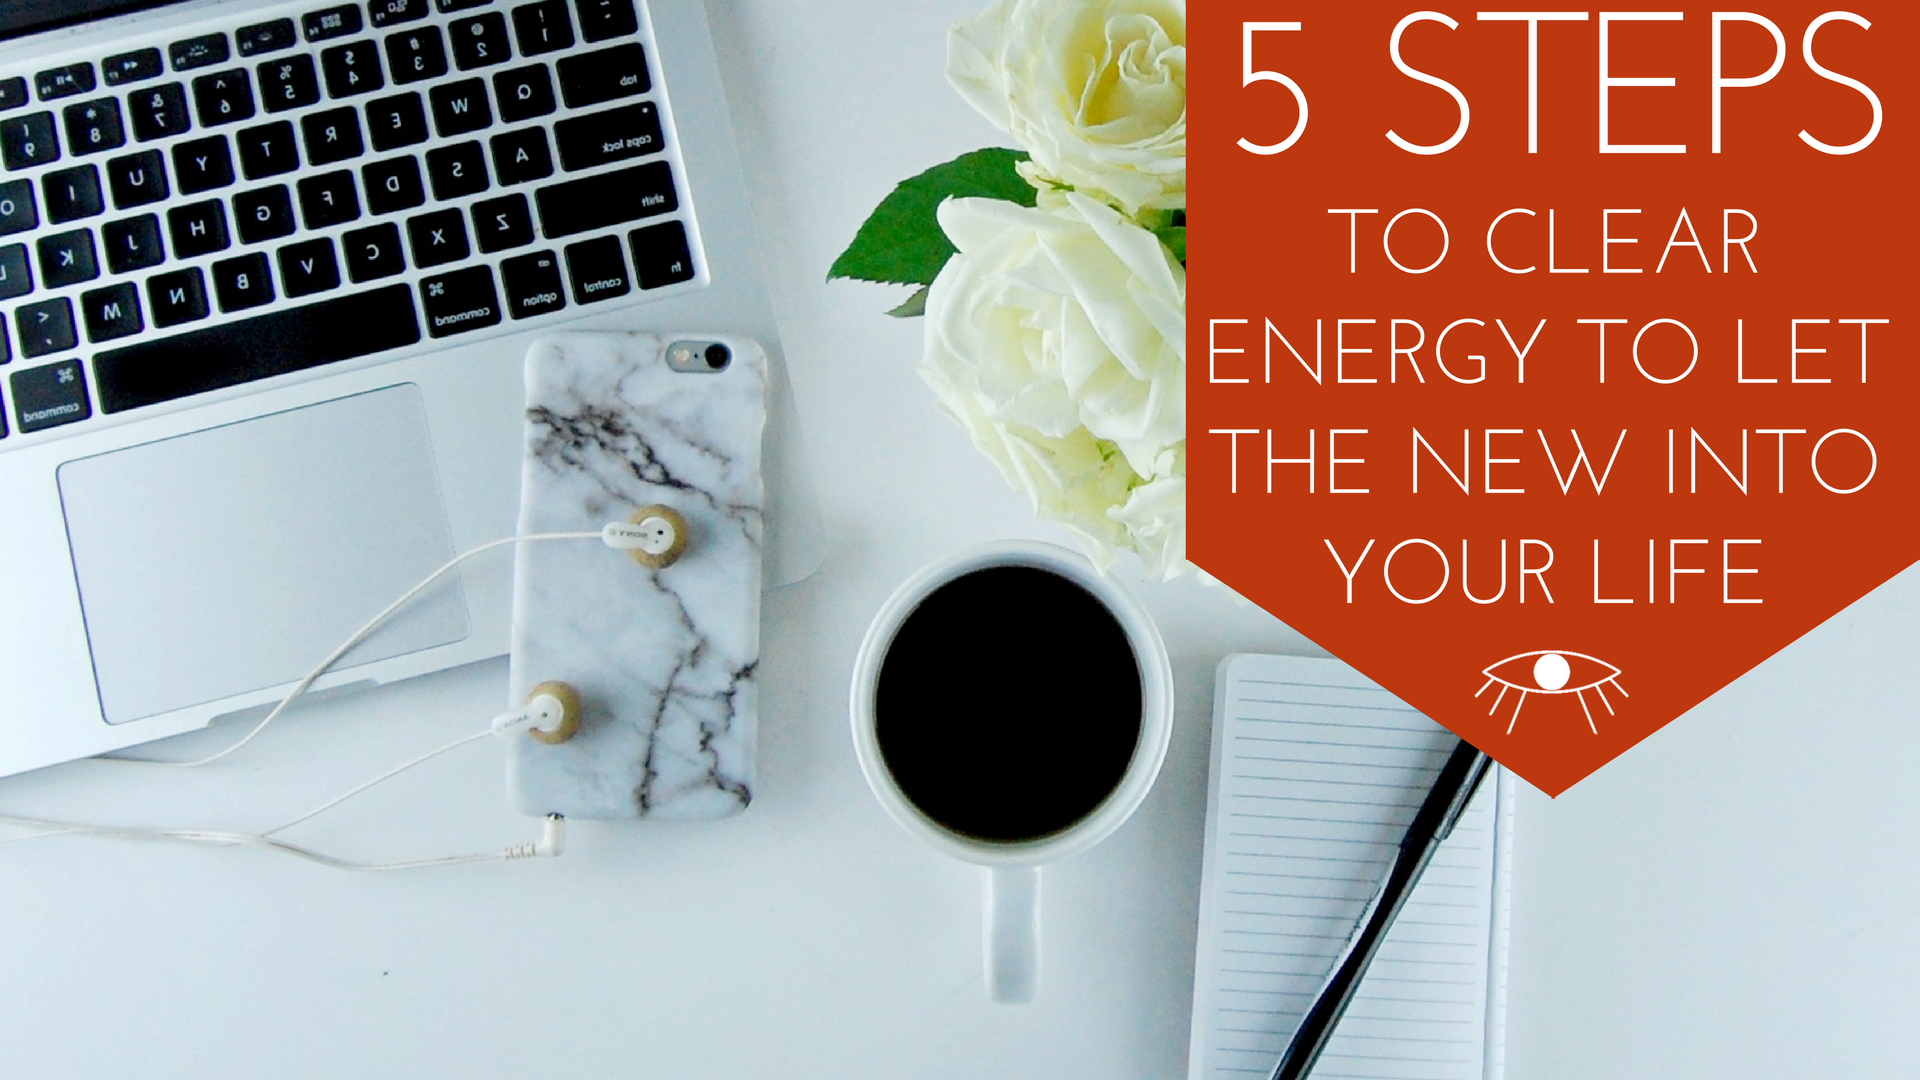 5 Steps to Clear Energy to Let the New Enter Your Life: It's time to clear the space, it is often we find ourselves in a disorganized, messy, chaotic field of energy that begins influences a chaotic life, This lead me to question: How do we put order back from chaos? Click to start applying the steps to your life!